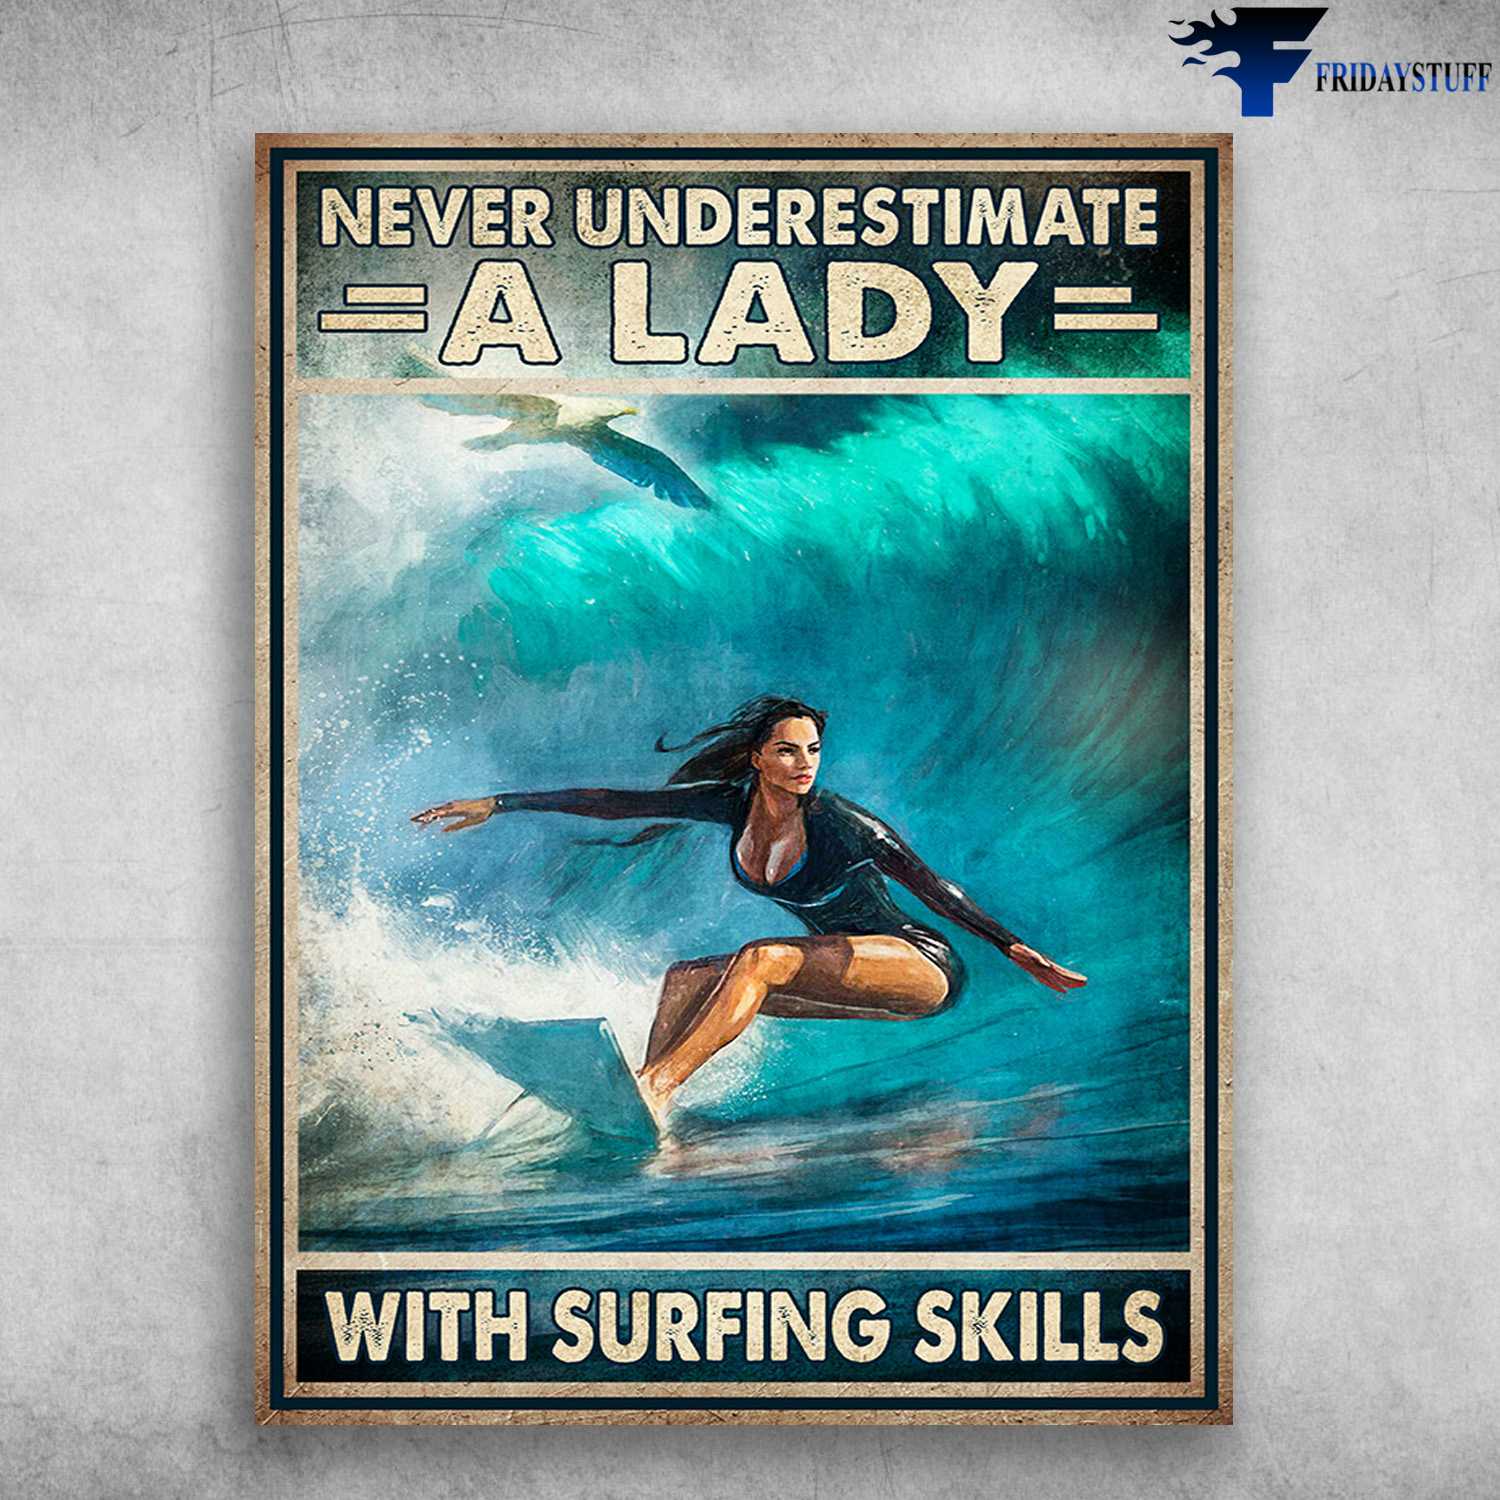 Surfing Poster, Girl Surfing - Never Underestimate A Lady, With Surfing Skills